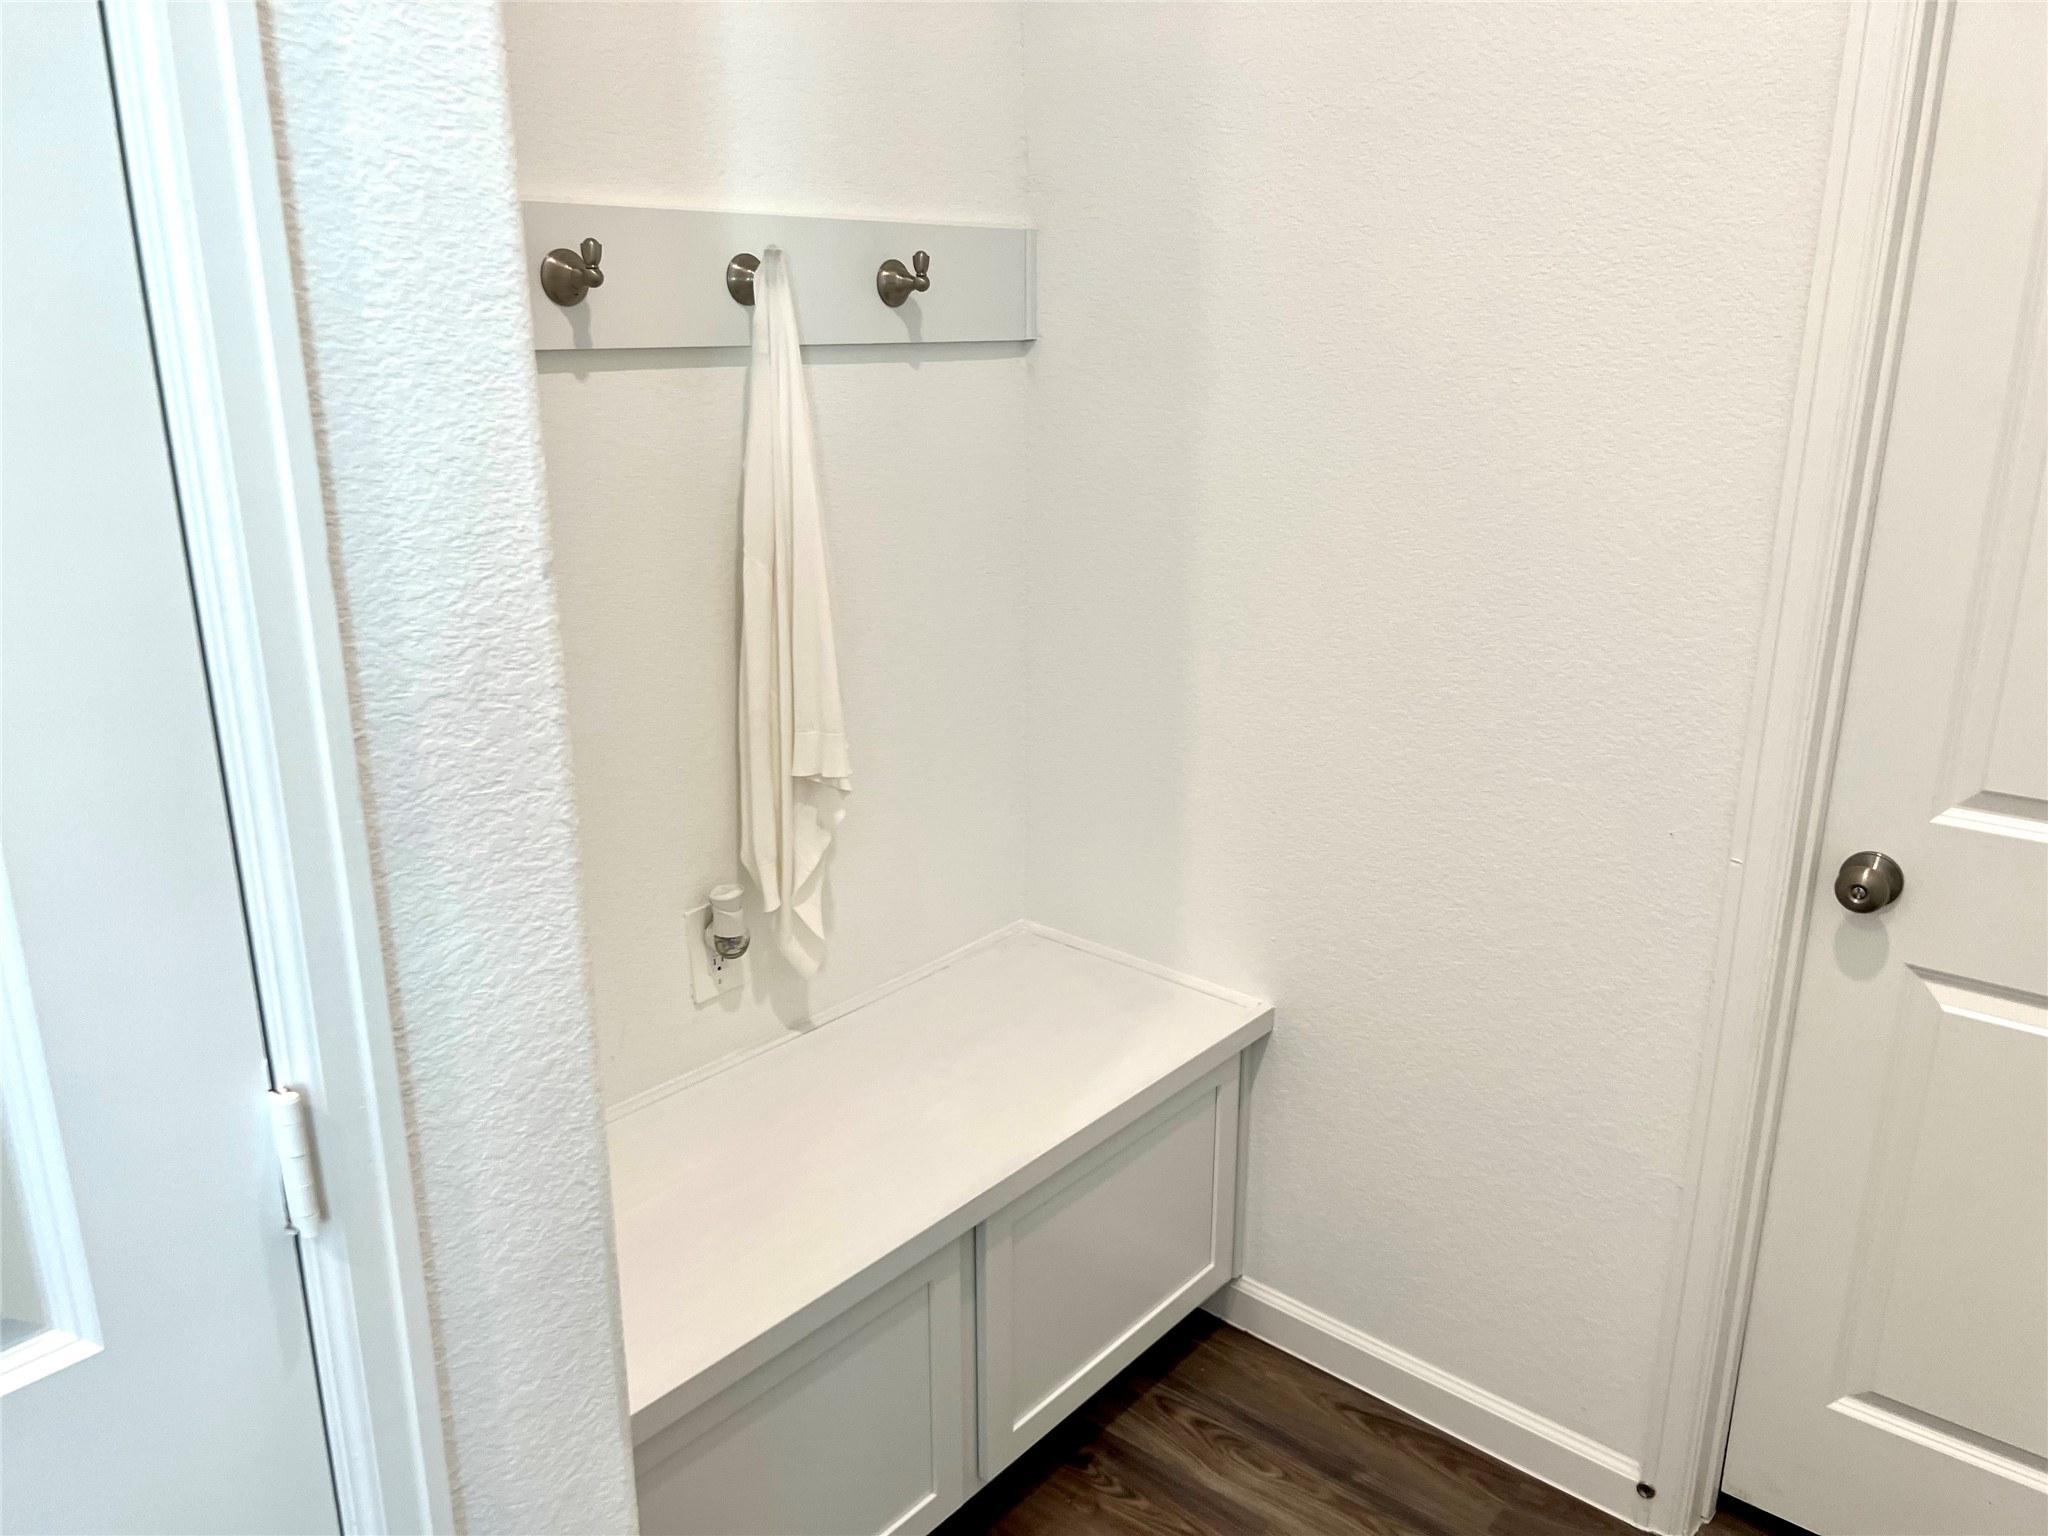 Off the garage entry is a convenient drop zone, plus a half bath with an attached storage closet.